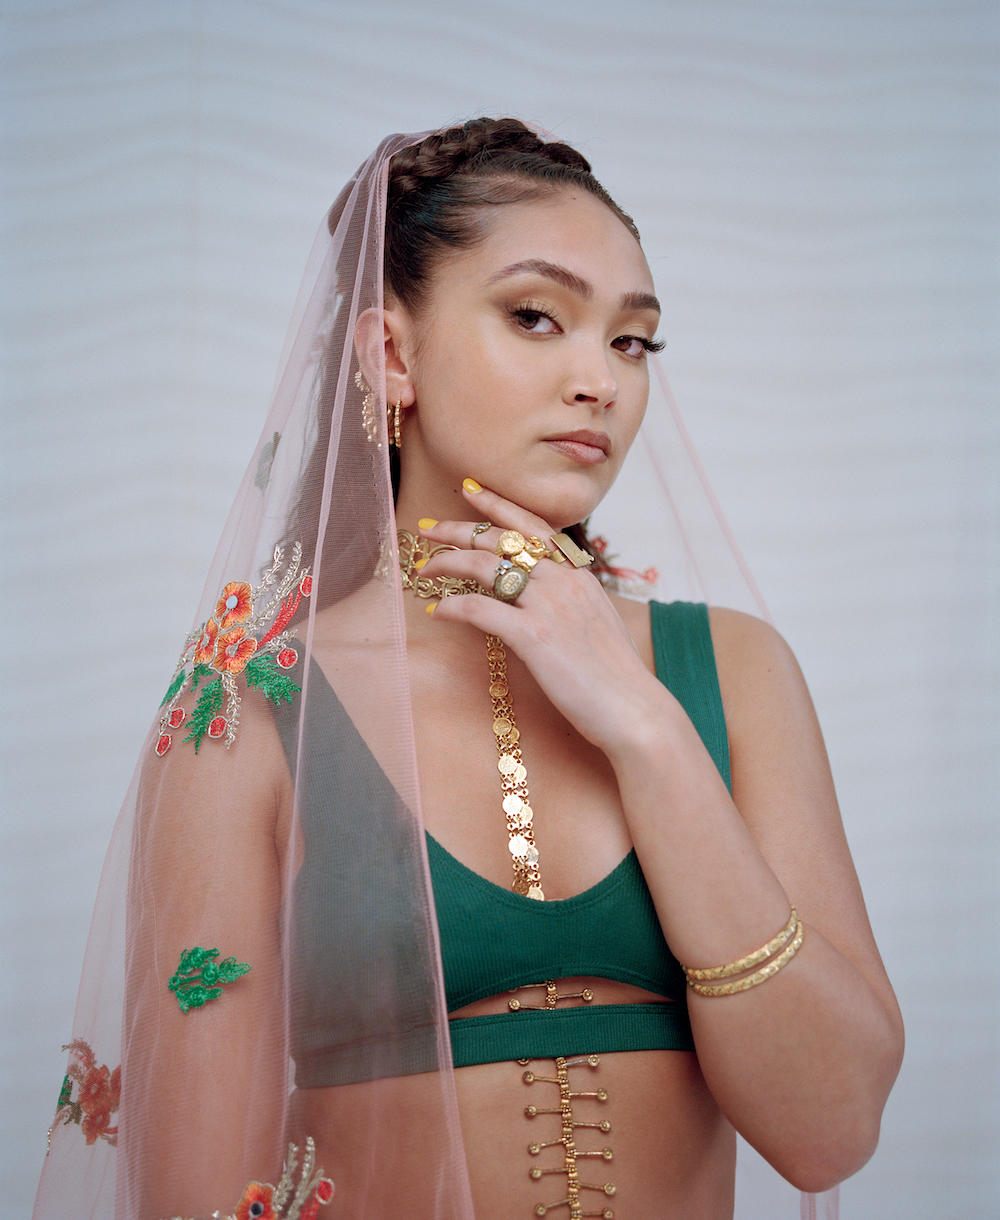 Joy Crookes on Influences, Songwriting, and the Strength in Vulnerability